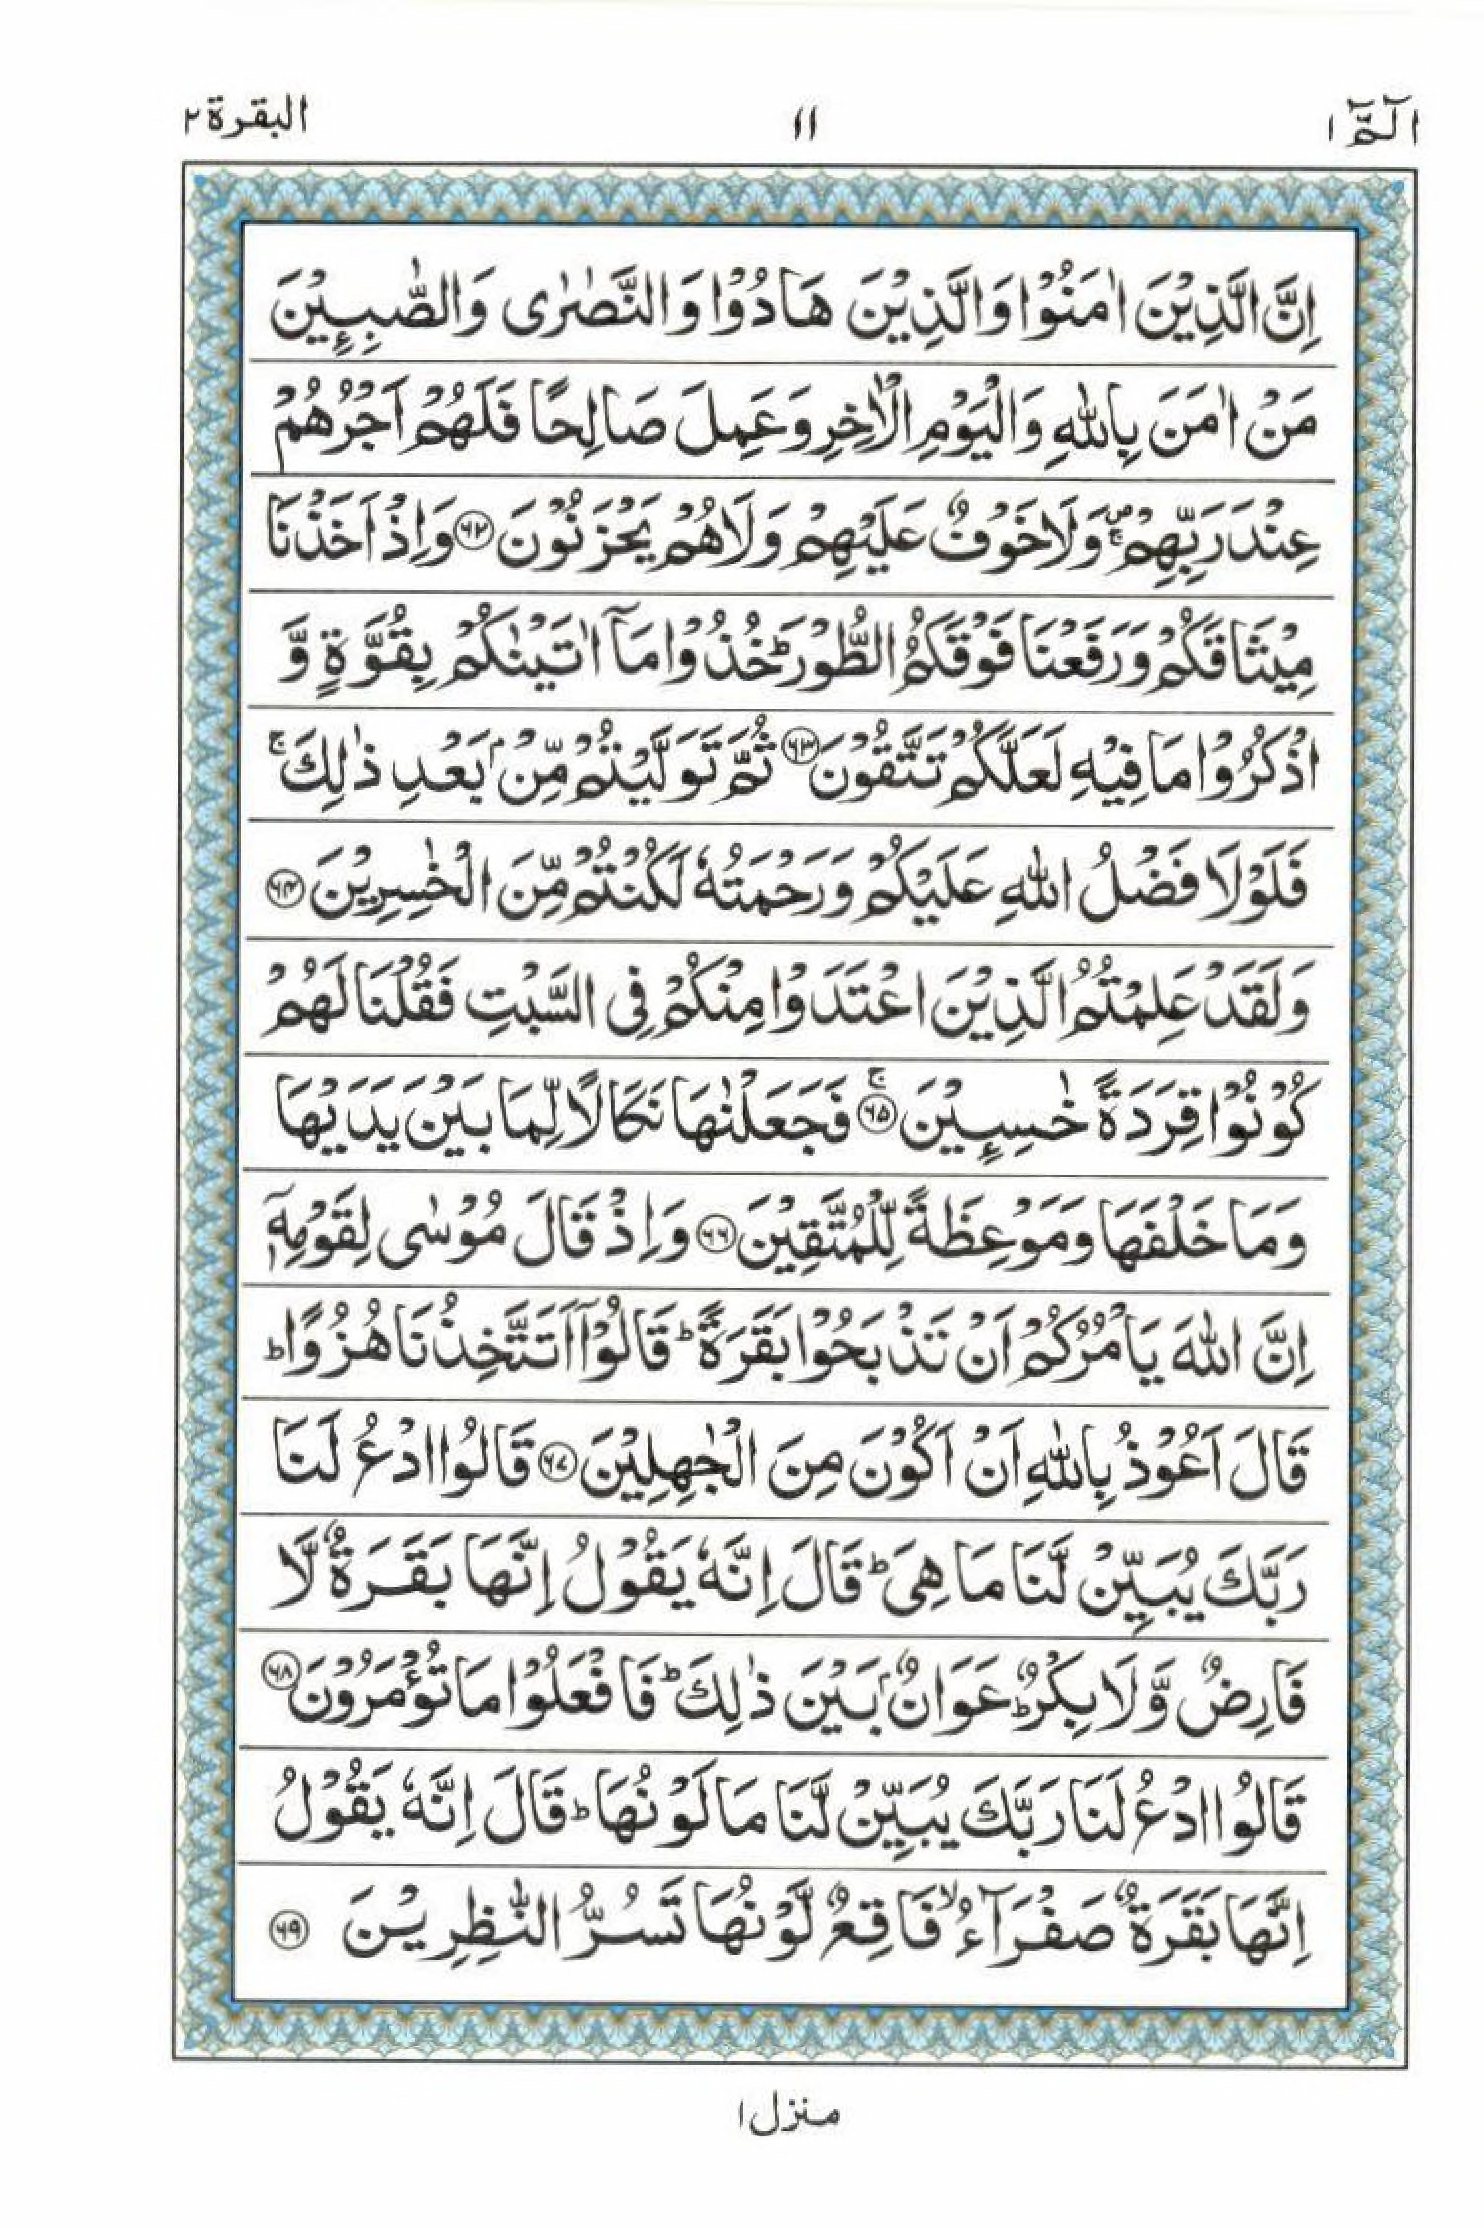 Read 15 Lines Quran, Part / Chapter / Siparah 1 Page 11